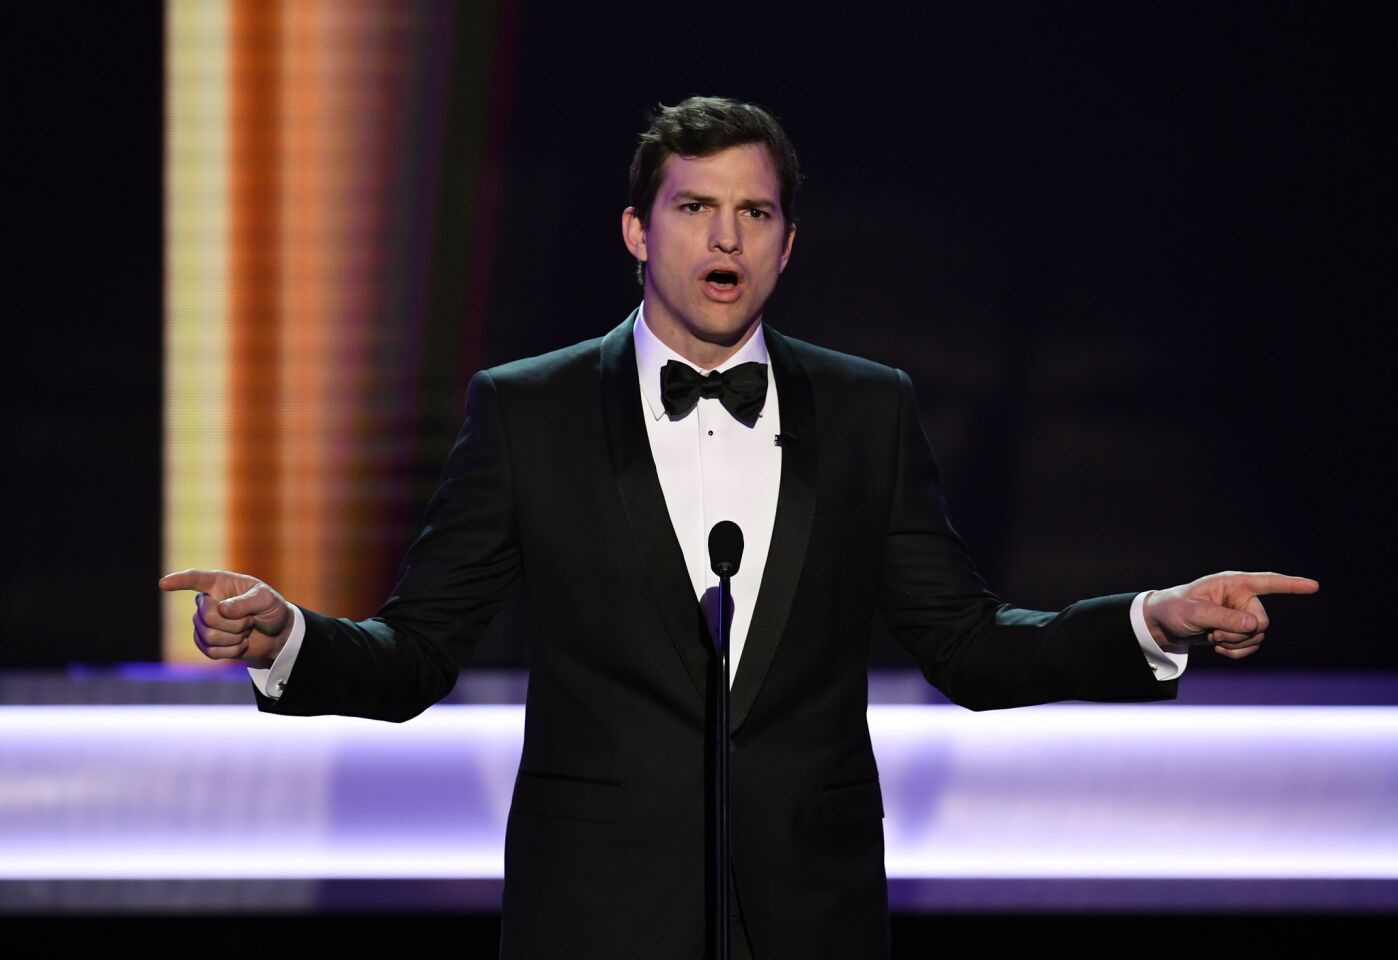 Ashton Kutcher speaks onstage during the 23rd Screen Actors Guild Awards at the Shrine Auditorium.